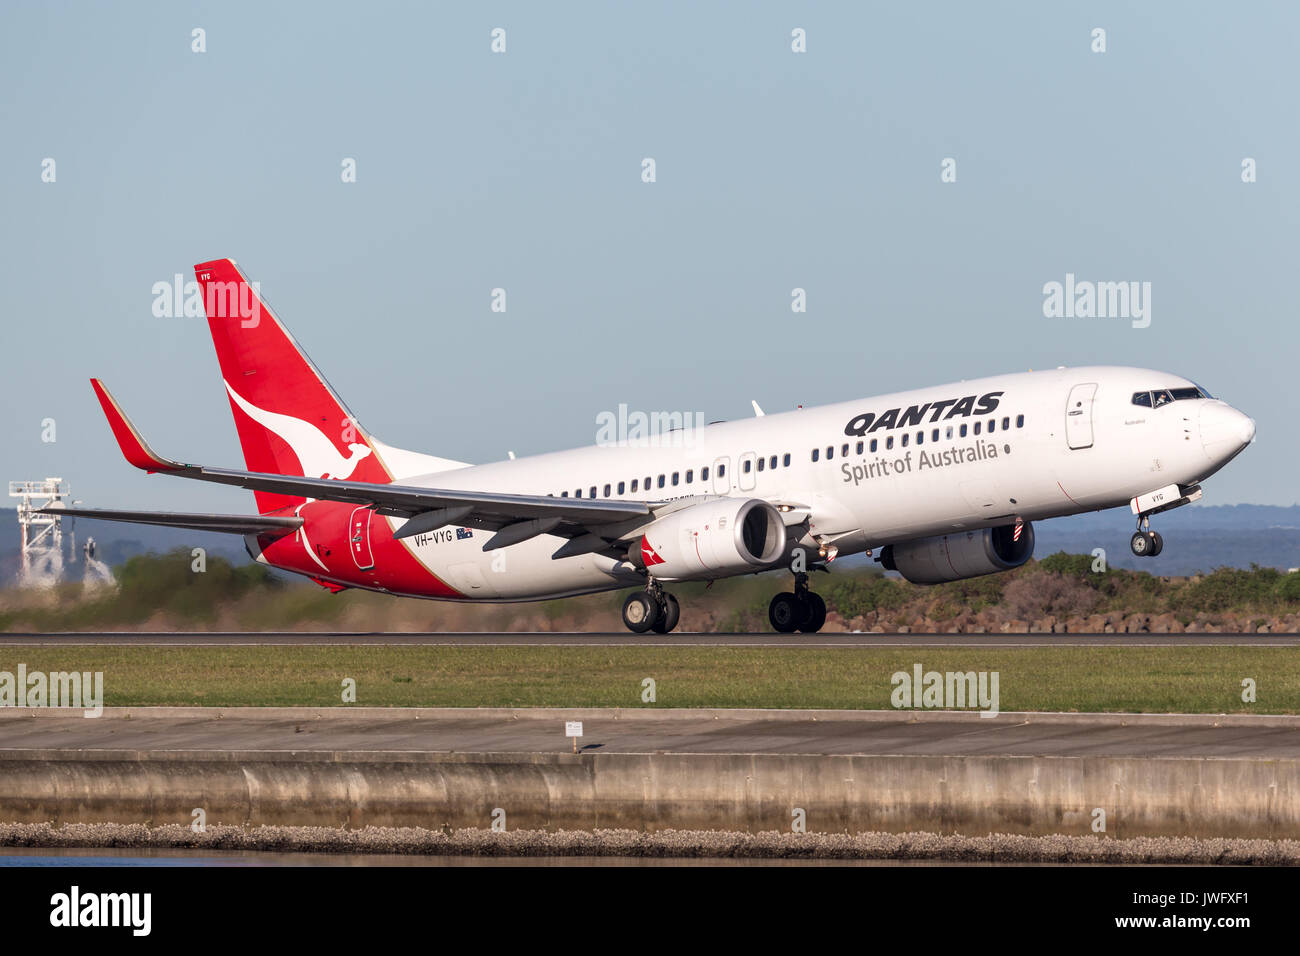 Qantas Boeing 737-800 aircraft taking off from Sydney Airport. Stock Photo